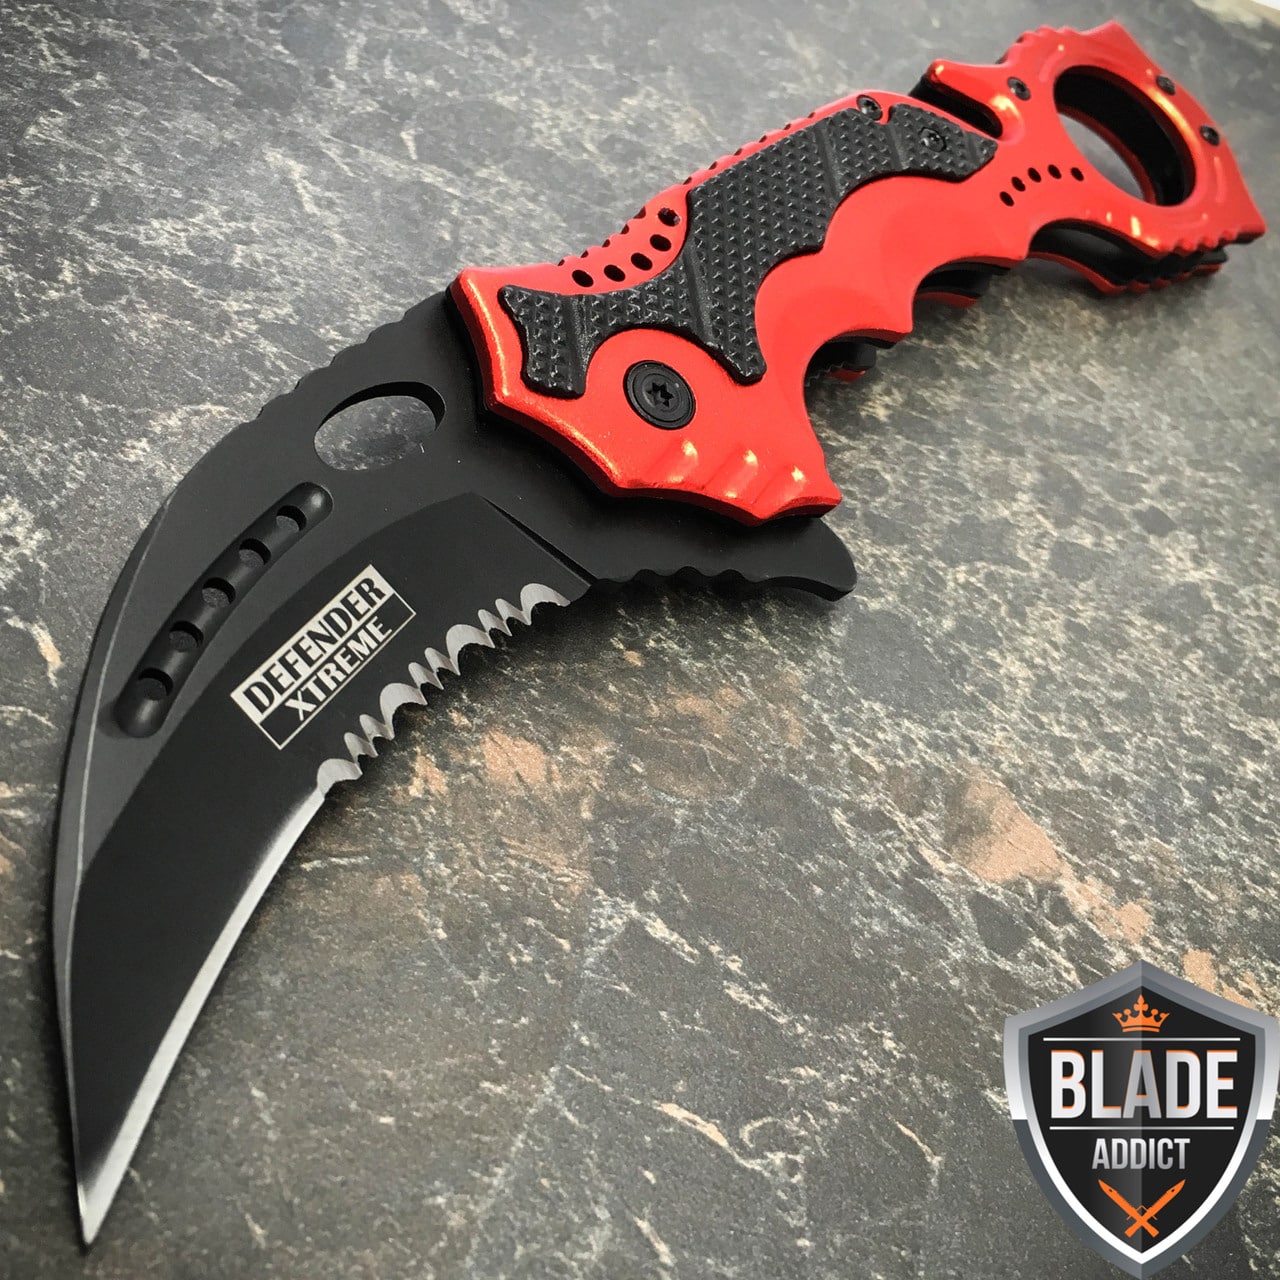 8" RED KARAMBIT Tactical Claw Spring Assisted Pocket Knife Rescue Combat EDC